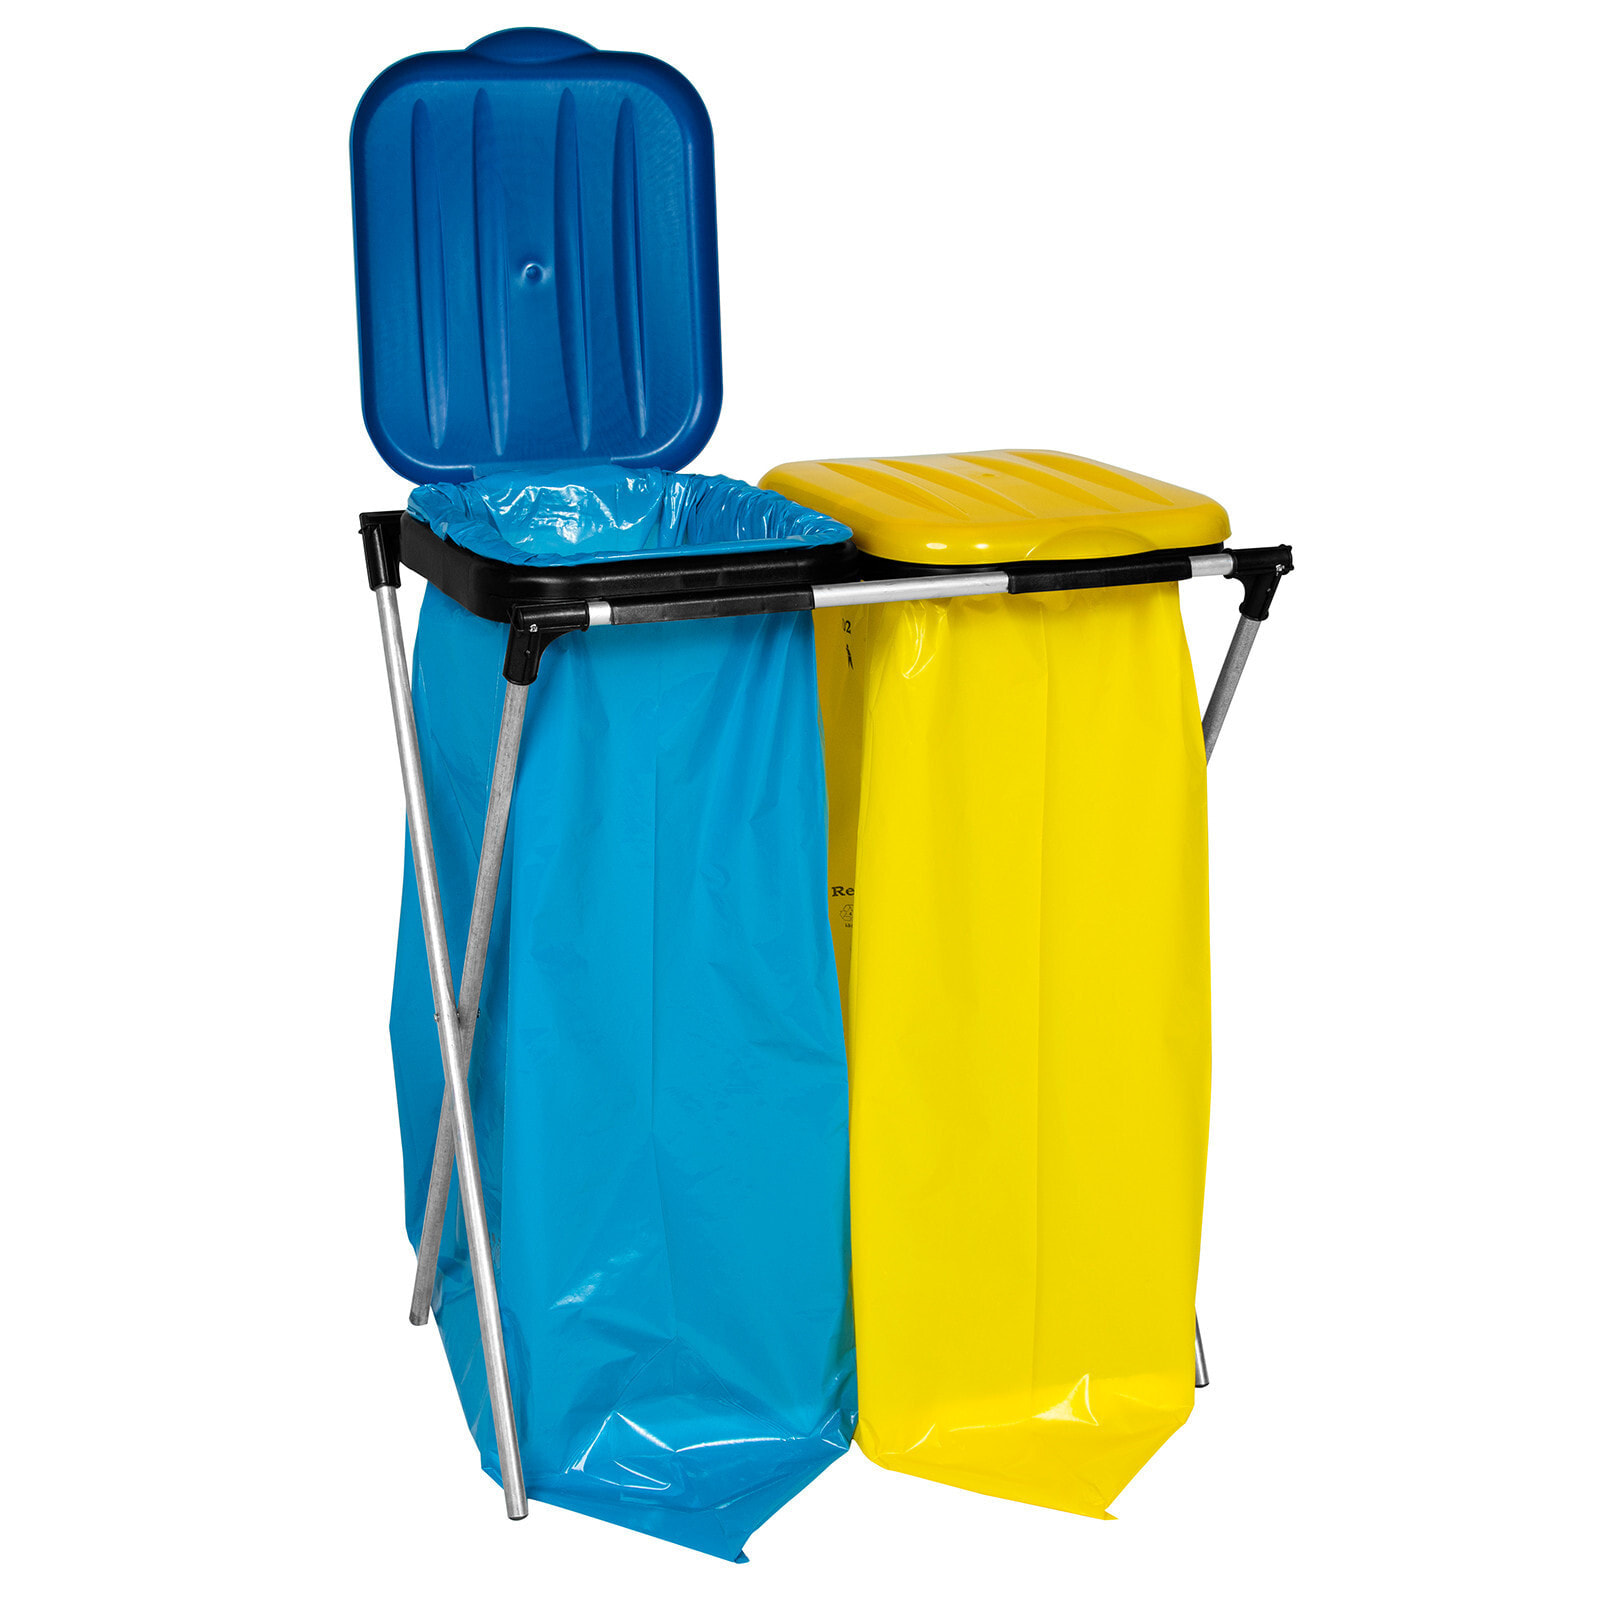 Stand holder for 120L garbage bags for segregation - 2 types of waste